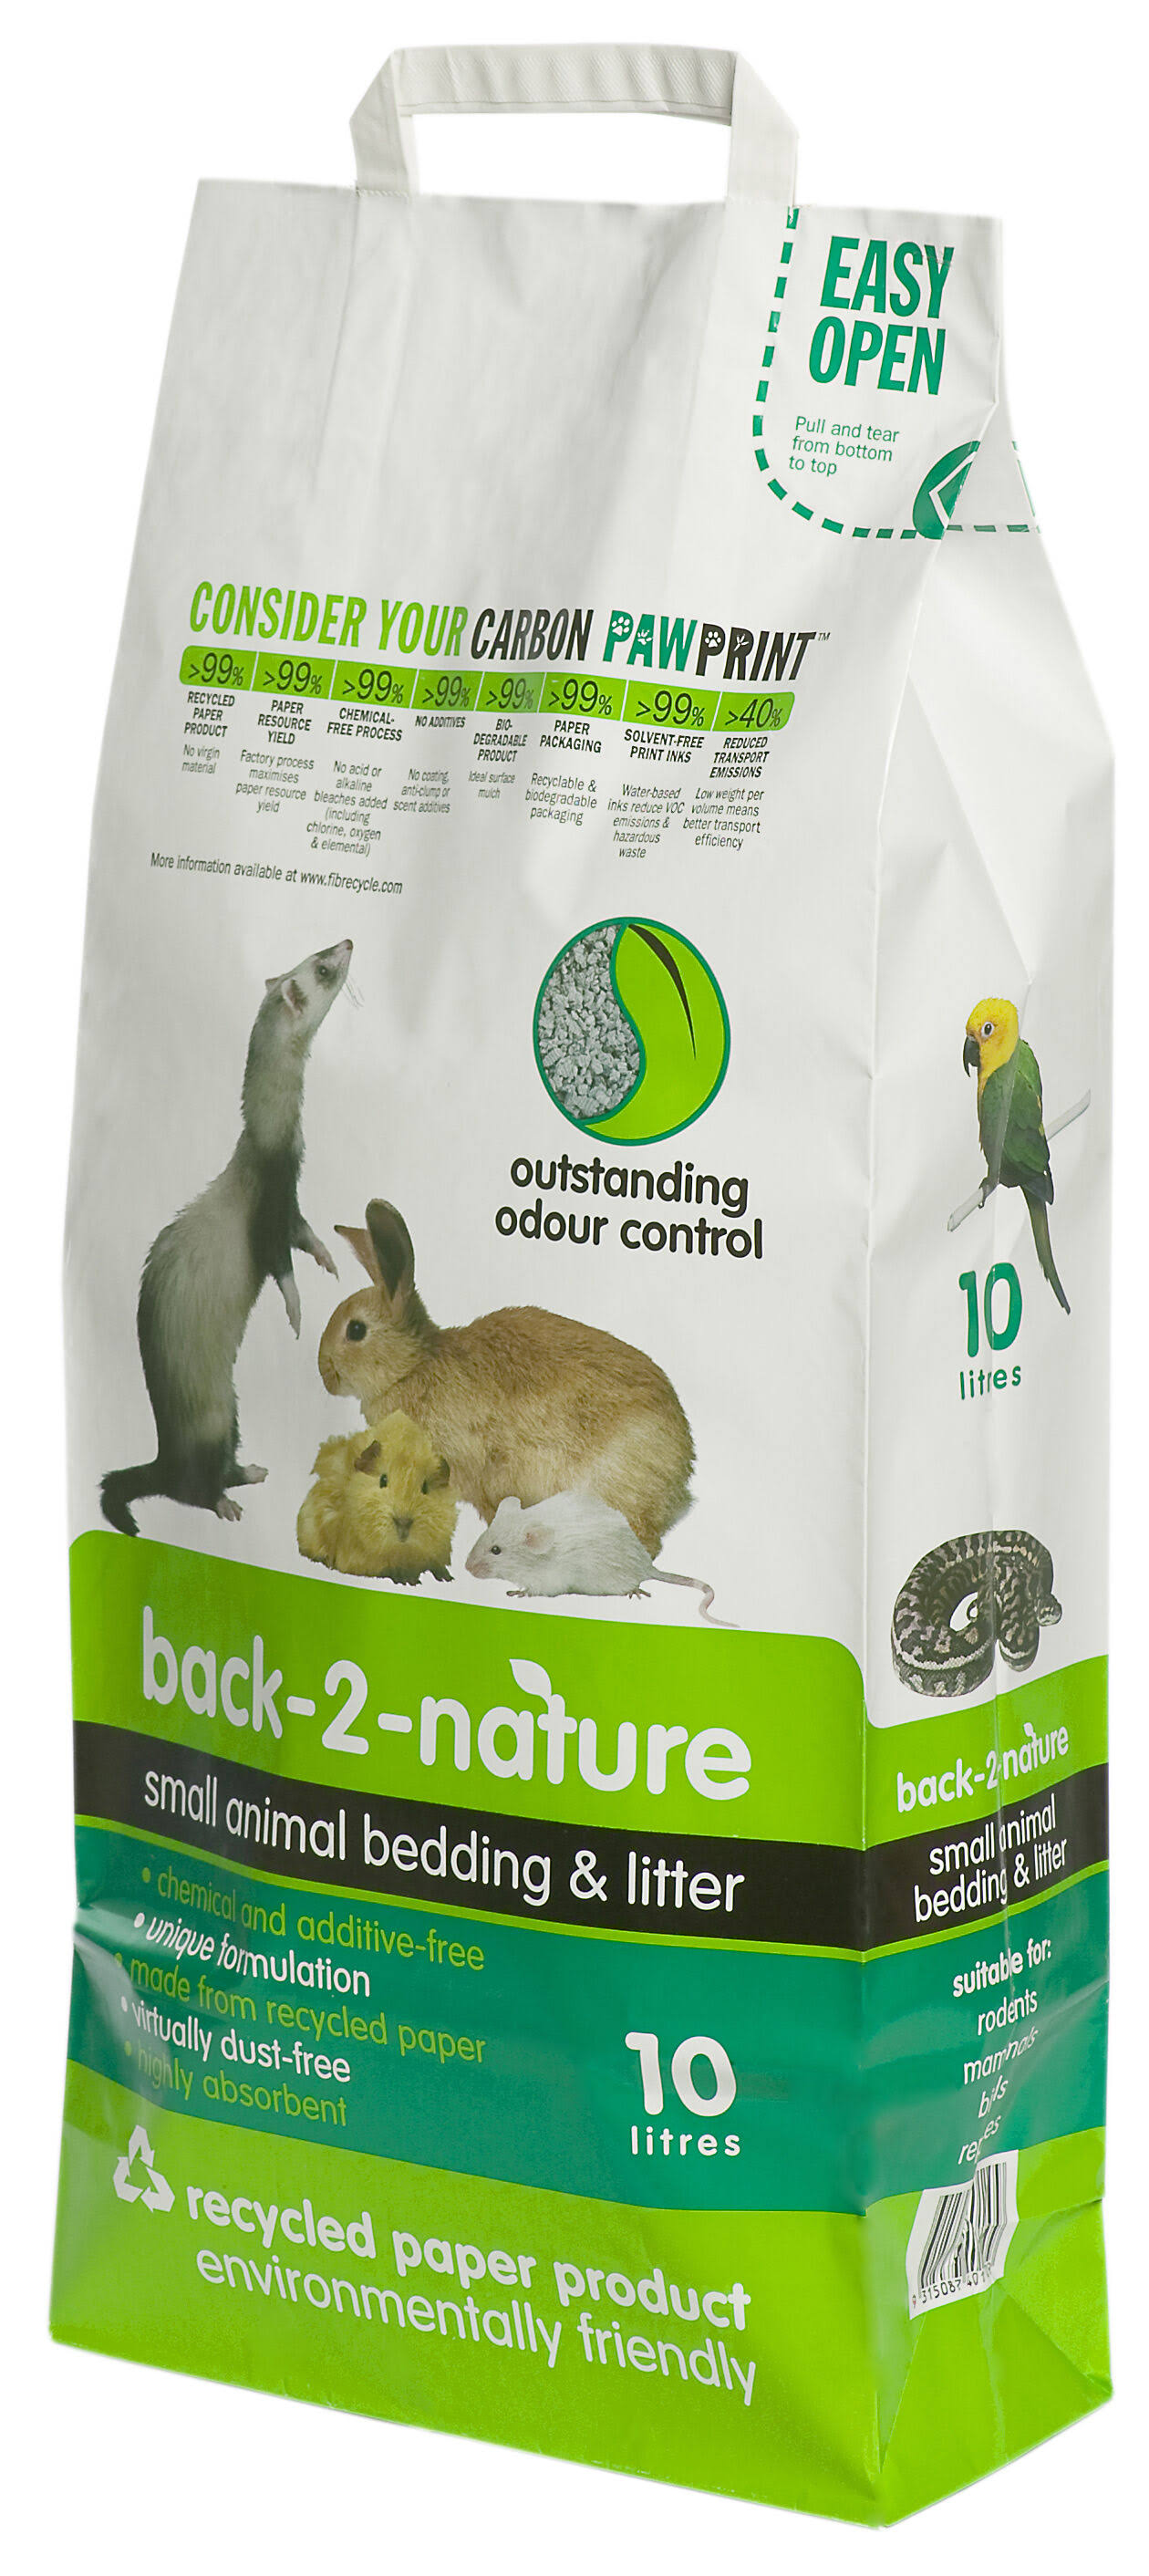 Fibrecycle Back-2-Nature Small Animal Bedding & Litter - 20l